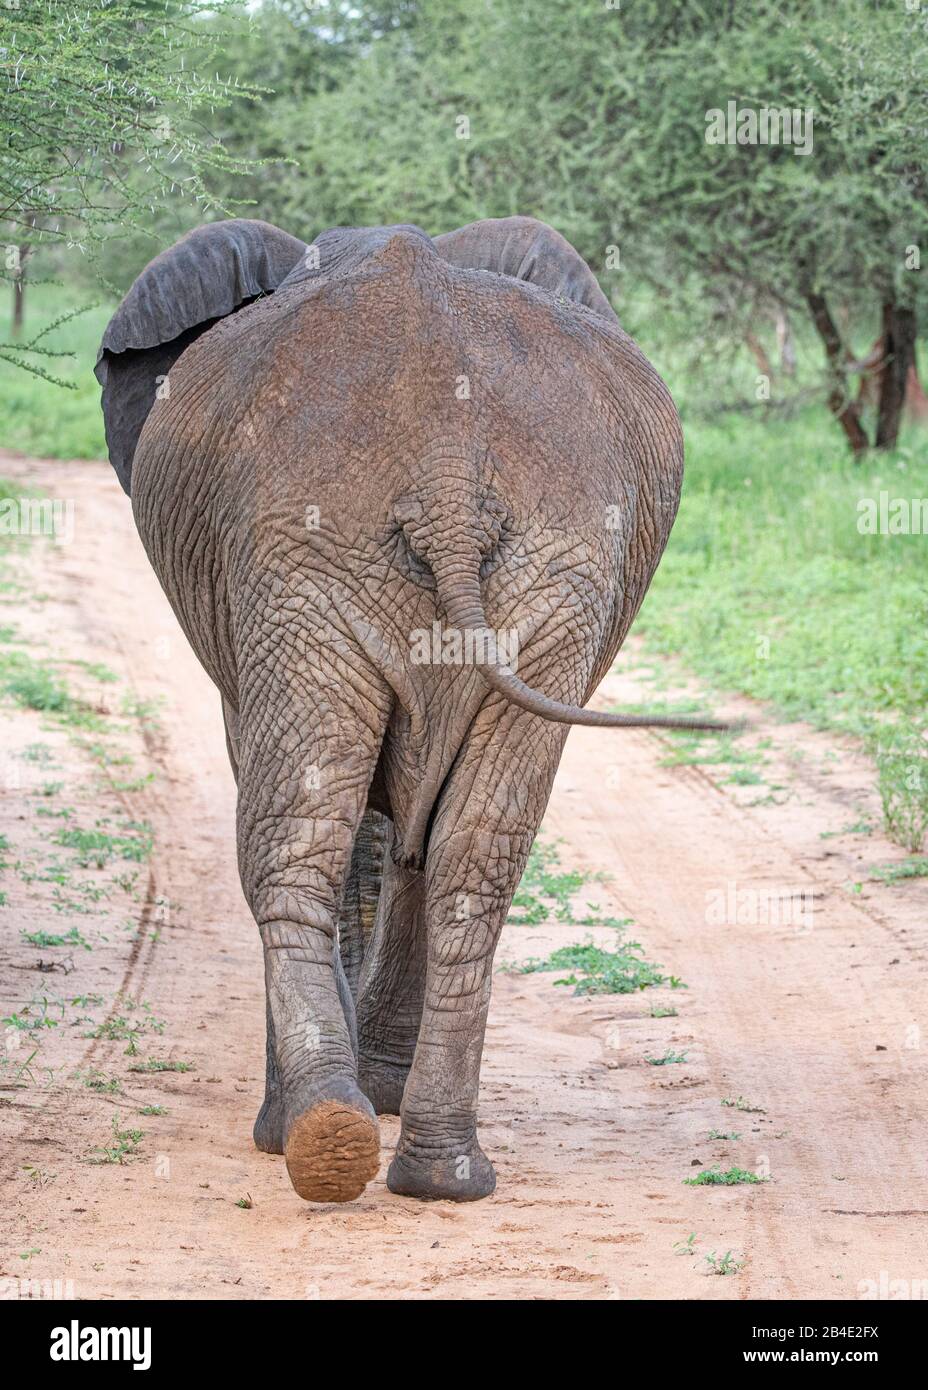 A foot, tent and jeep safari through northern Tanzania at the end of the rainy season in May. National Parks Serengeti, Ngorongoro Crater, Tarangire, Arusha and Lake Manyara. Elephant goes clearly over a sand path in the African savannah, back view, sole of the foot Stock Photo